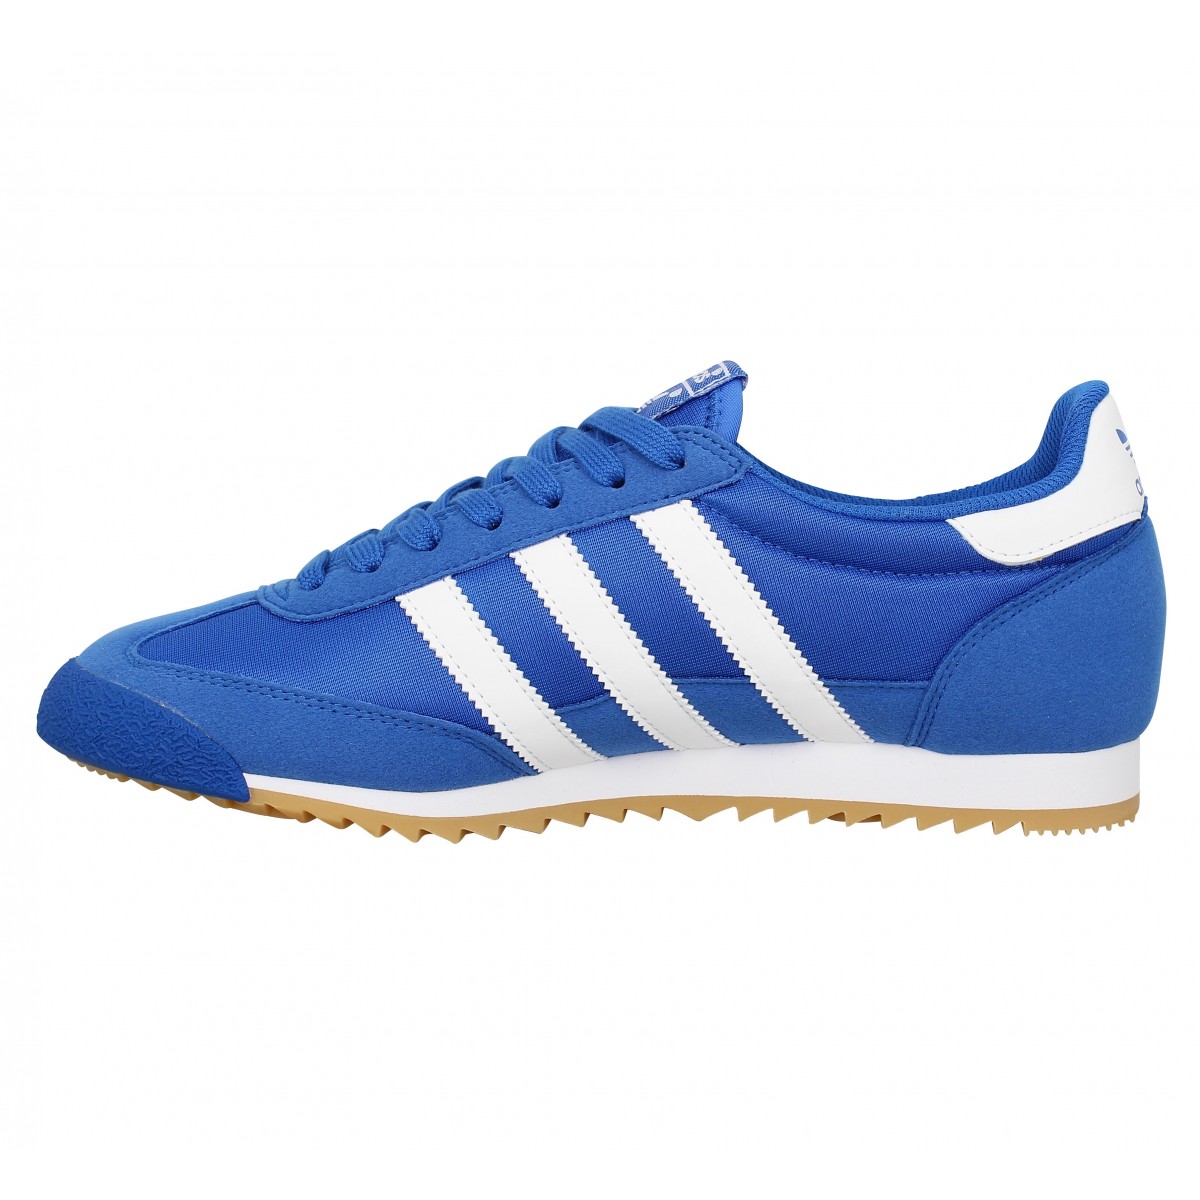 adidas dragon homme taille 43